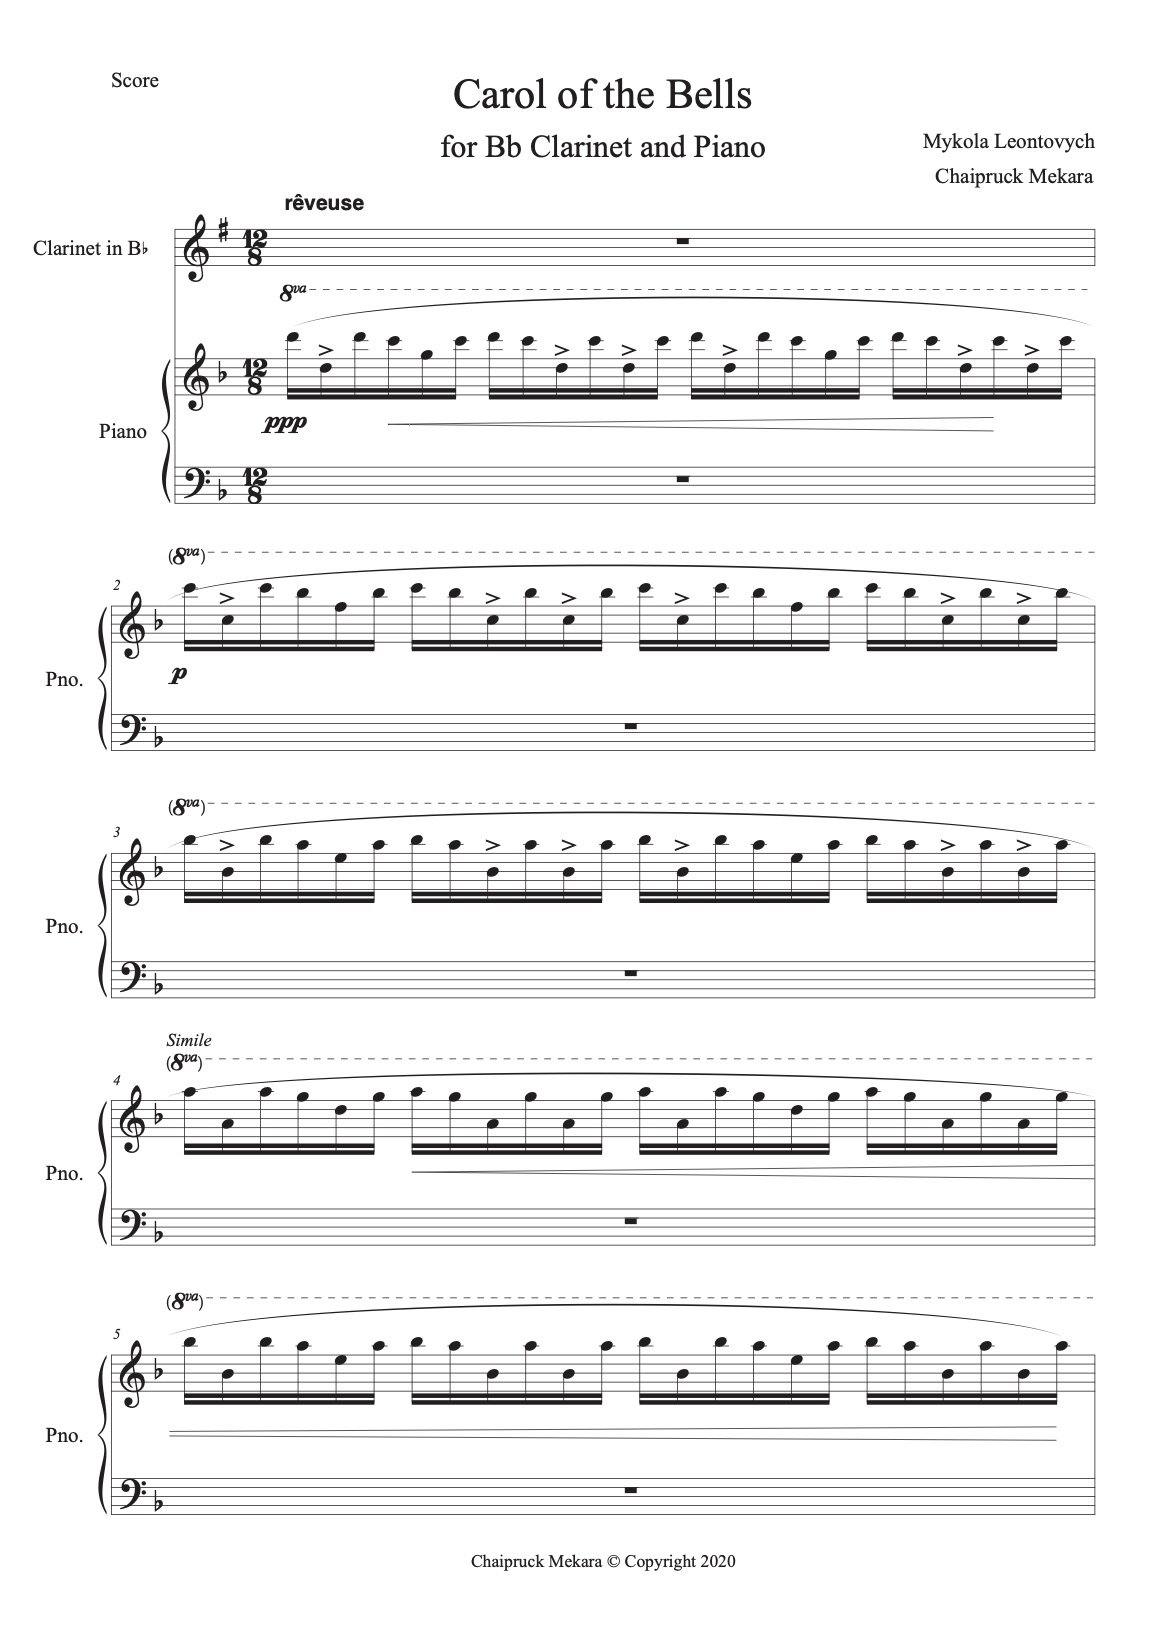 Audio Mp3 - Piano part for Carol of the Bells for Bb Clarinet and Piano - ChaipruckMekara